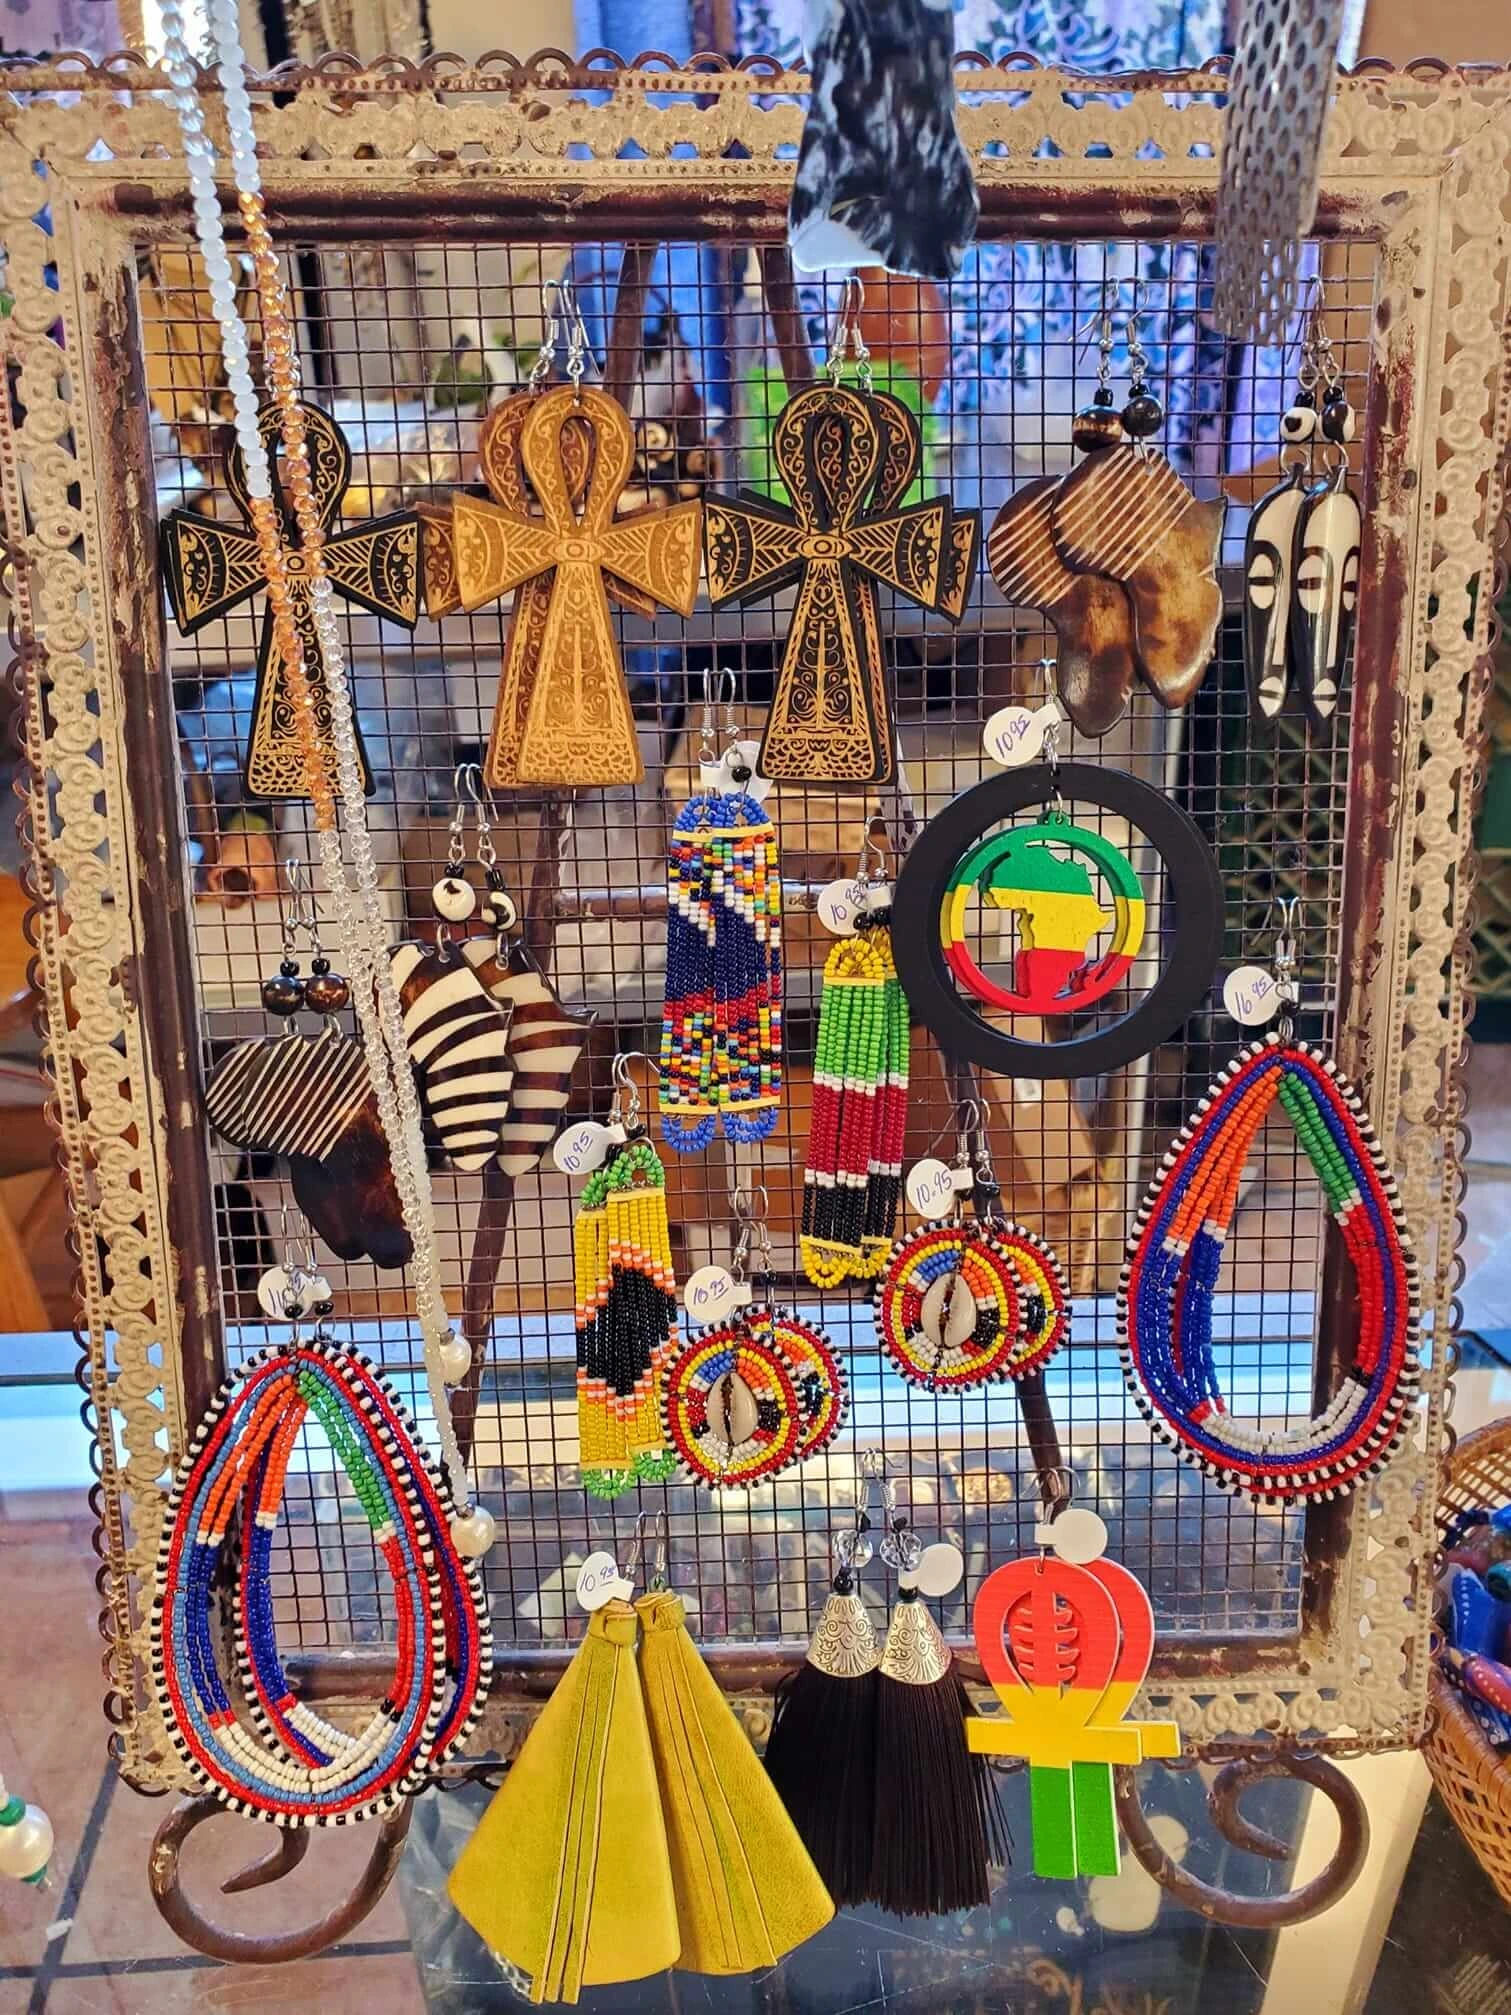 A display of beaded jewelry from Ghana